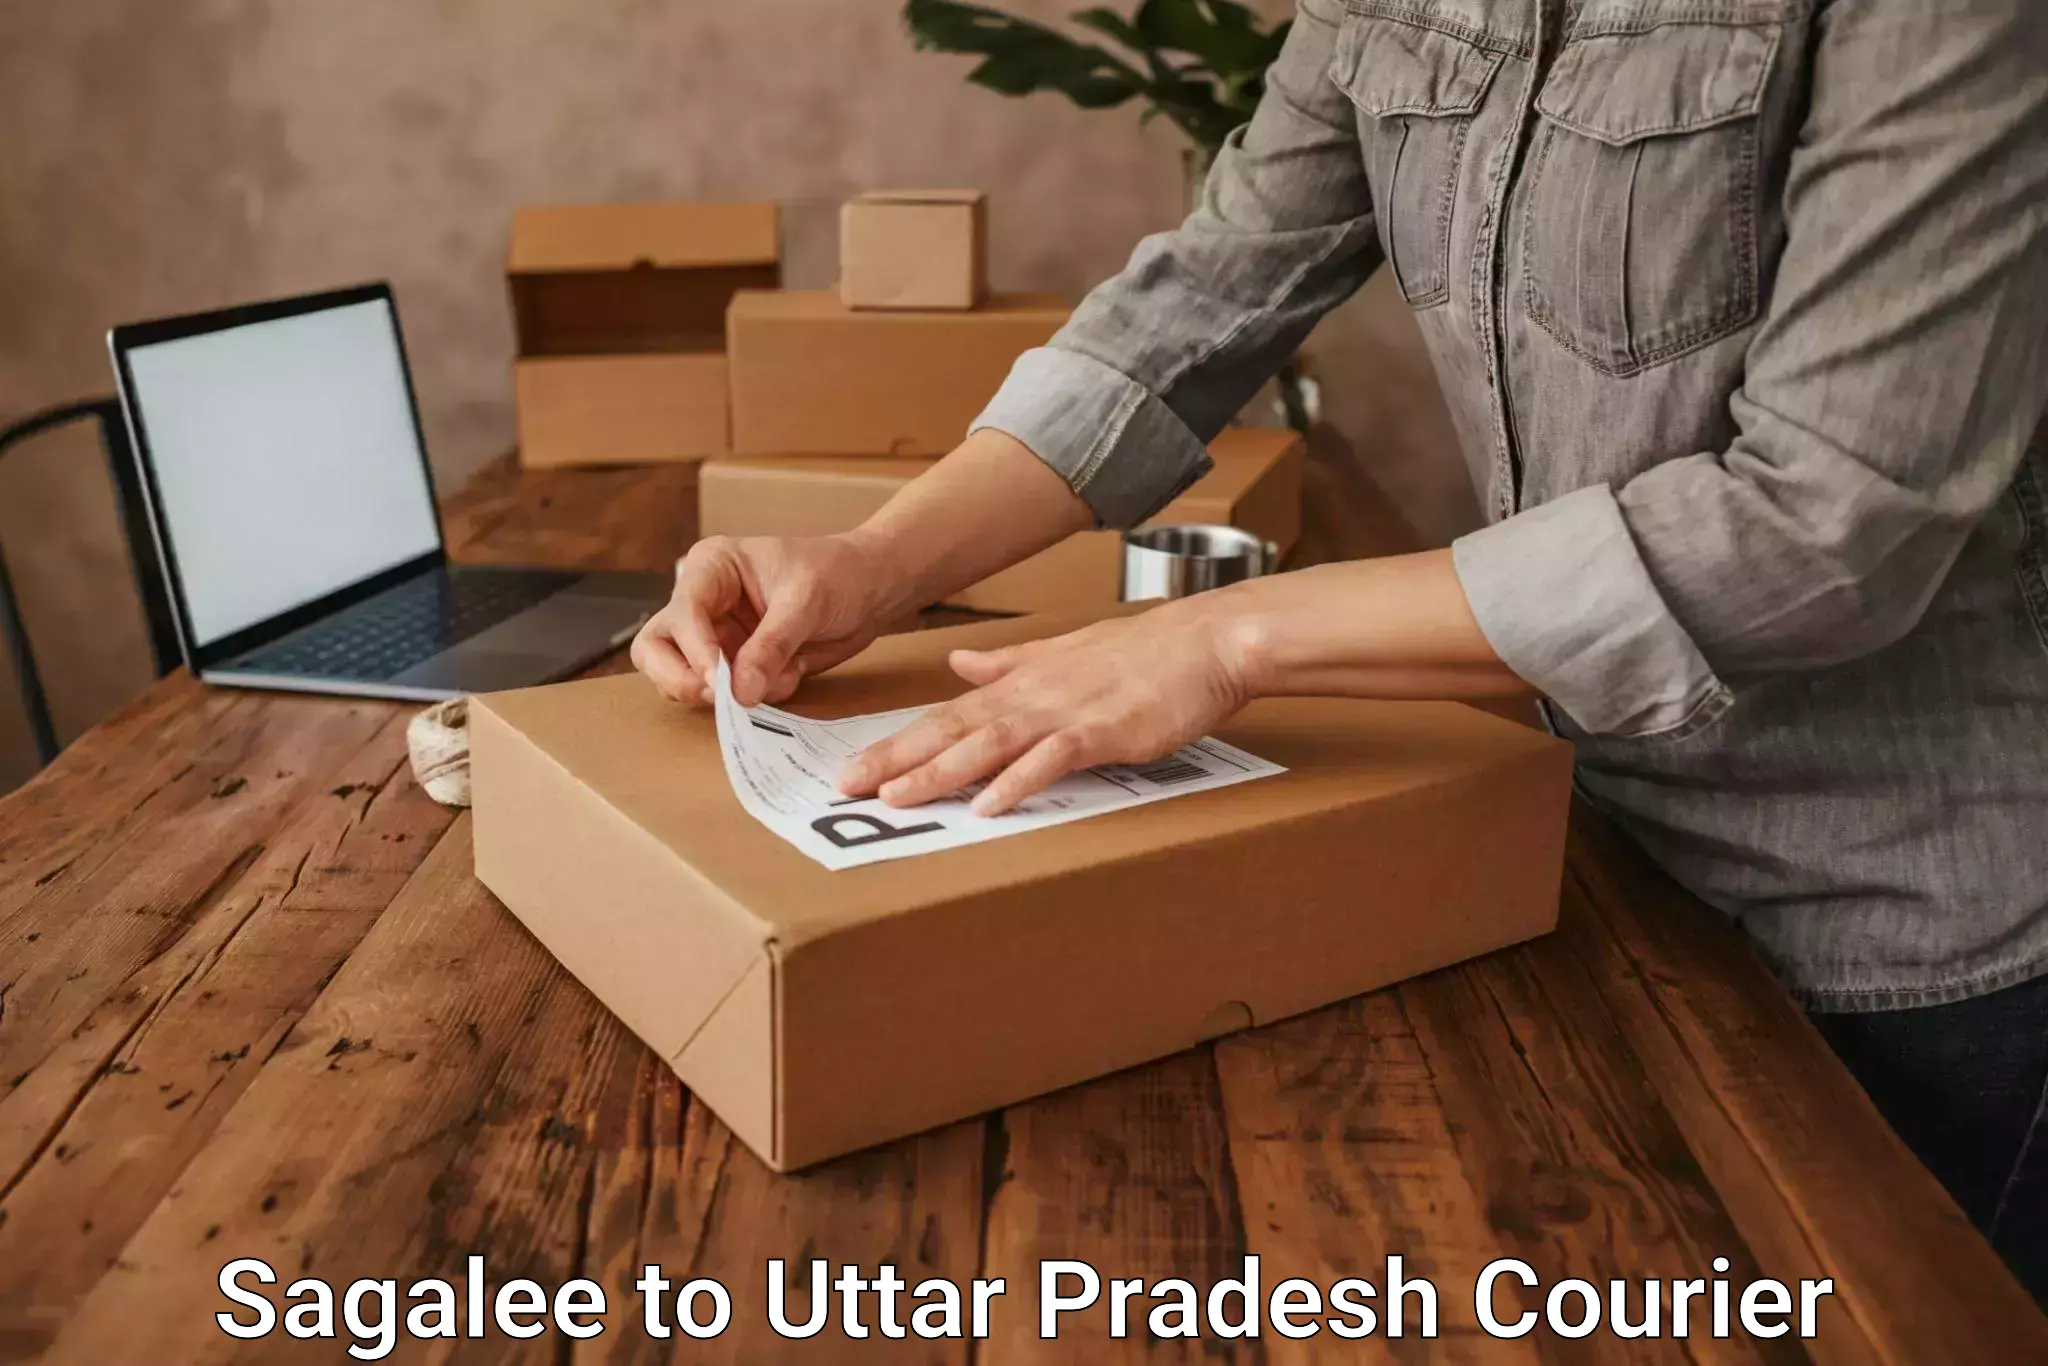 Bulk courier orders Sagalee to Agra